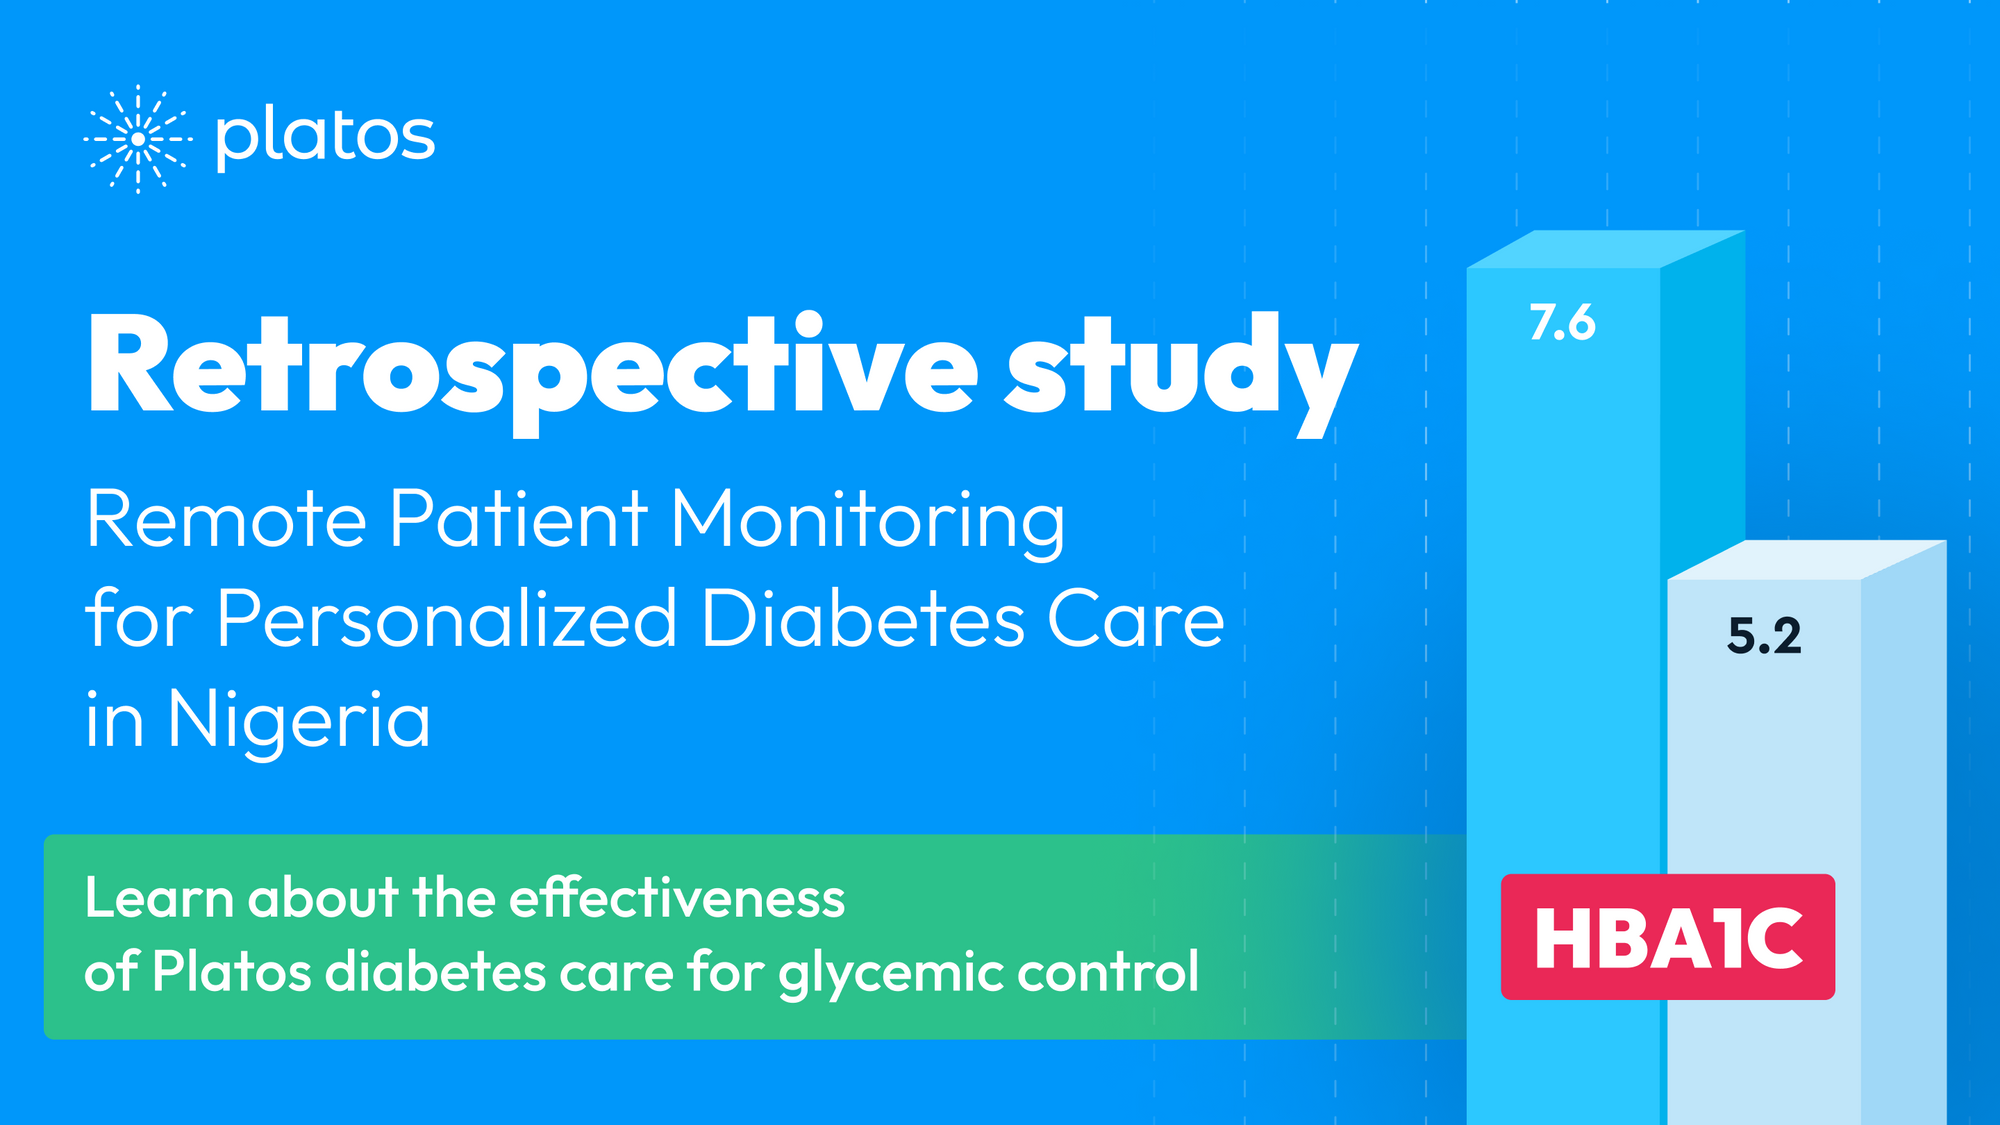 Remote Patient Monitoring for Personalized Diabetes Care in Nigeria